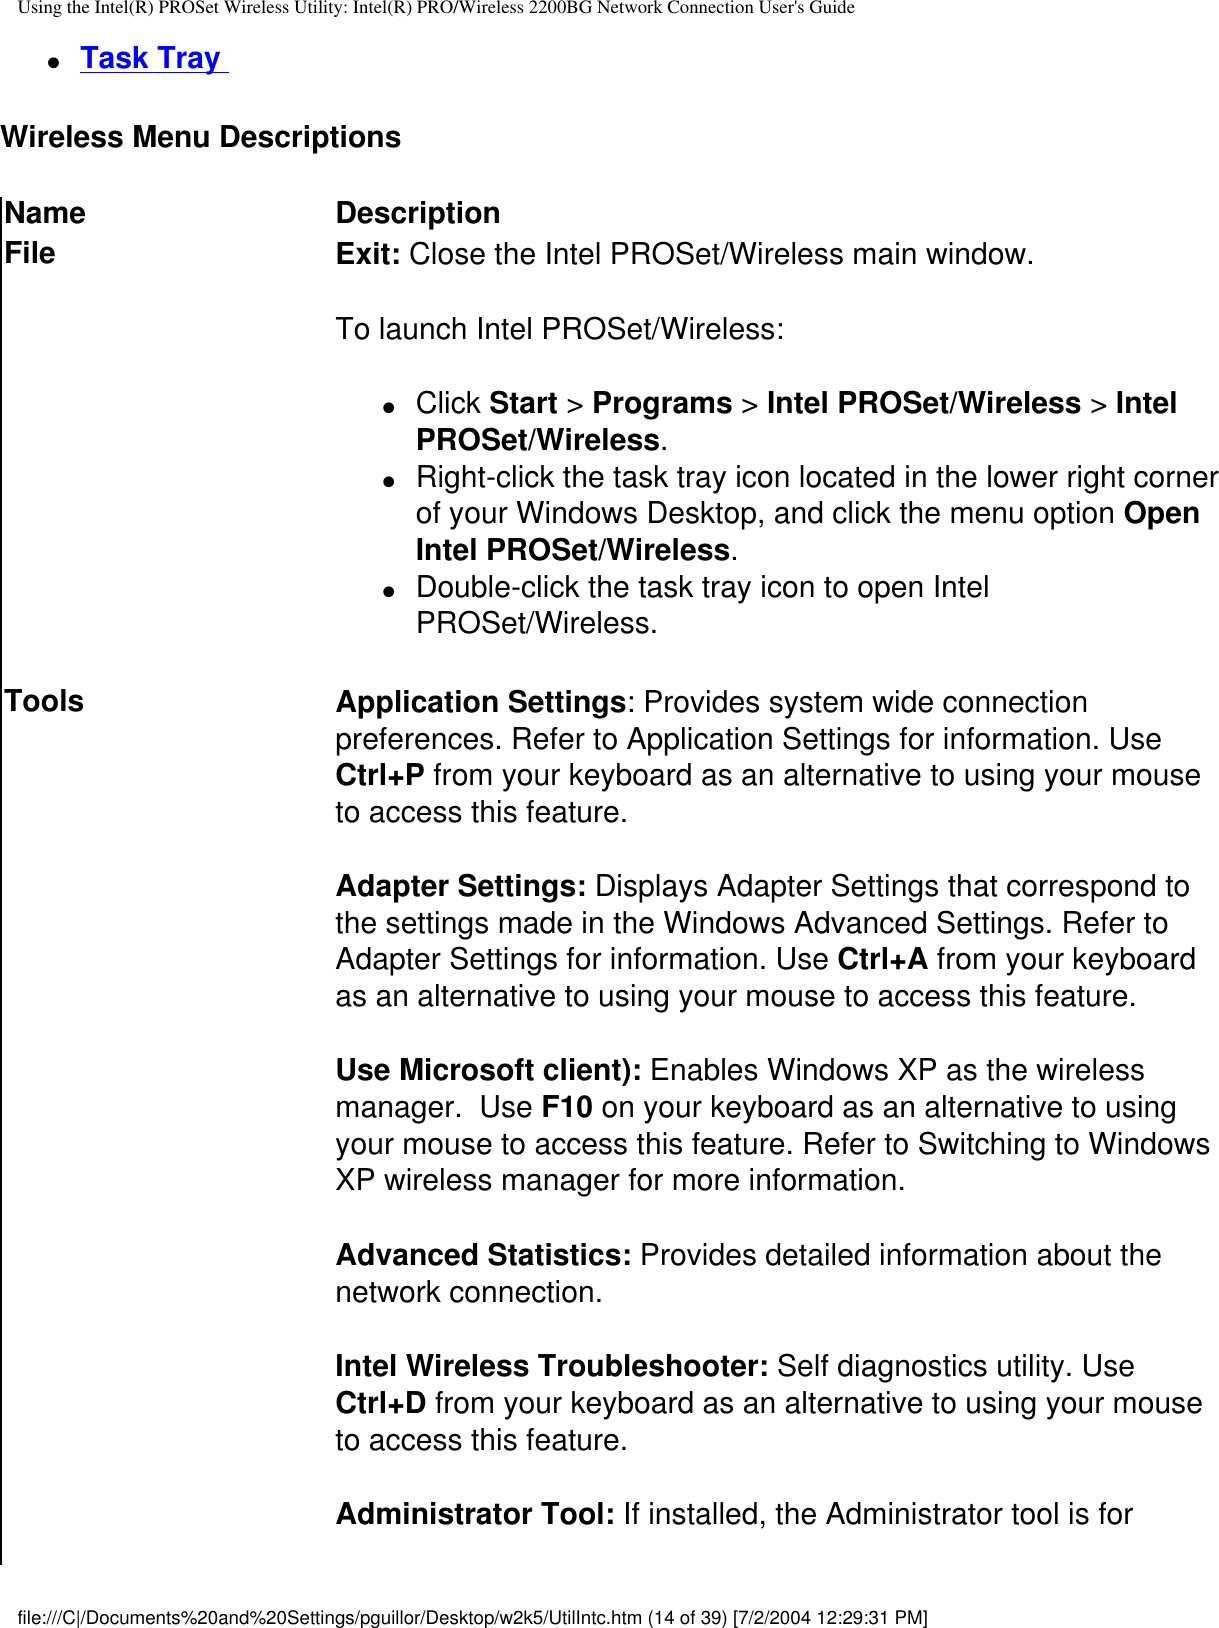 Using the Intel(R) PROSet Wireless Utility: Intel(R) PRO/Wireless 2200BG Network Connection User&apos;s Guide●     Task Tray Wireless Menu Descriptions  Name DescriptionFile Exit: Close the Intel PROSet/Wireless main window. To launch Intel PROSet/Wireless:●     Click Start &gt; Programs &gt; Intel PROSet/Wireless &gt; Intel PROSet/Wireless.●     Right-click the task tray icon located in the lower right corner of your Windows Desktop, and click the menu option Open Intel PROSet/Wireless.●     Double-click the task tray icon to open Intel PROSet/Wireless.Tools Application Settings: Provides system wide connection preferences. Refer to Application Settings for information. Use Ctrl+P from your keyboard as an alternative to using your mouse to access this feature.Adapter Settings: Displays Adapter Settings that correspond to the settings made in the Windows Advanced Settings. Refer to Adapter Settings for information. Use Ctrl+A from your keyboard as an alternative to using your mouse to access this feature.Use Microsoft client): Enables Windows XP as the wireless manager.  Use F10 on your keyboard as an alternative to using your mouse to access this feature. Refer to Switching to Windows XP wireless manager for more information.Advanced Statistics: Provides detailed information about the network connection.Intel Wireless Troubleshooter: Self diagnostics utility. Use Ctrl+D from your keyboard as an alternative to using your mouse to access this feature.Administrator Tool: If installed, the Administrator tool is for file:///C|/Documents%20and%20Settings/pguillor/Desktop/w2k5/UtilIntc.htm (14 of 39) [7/2/2004 12:29:31 PM]